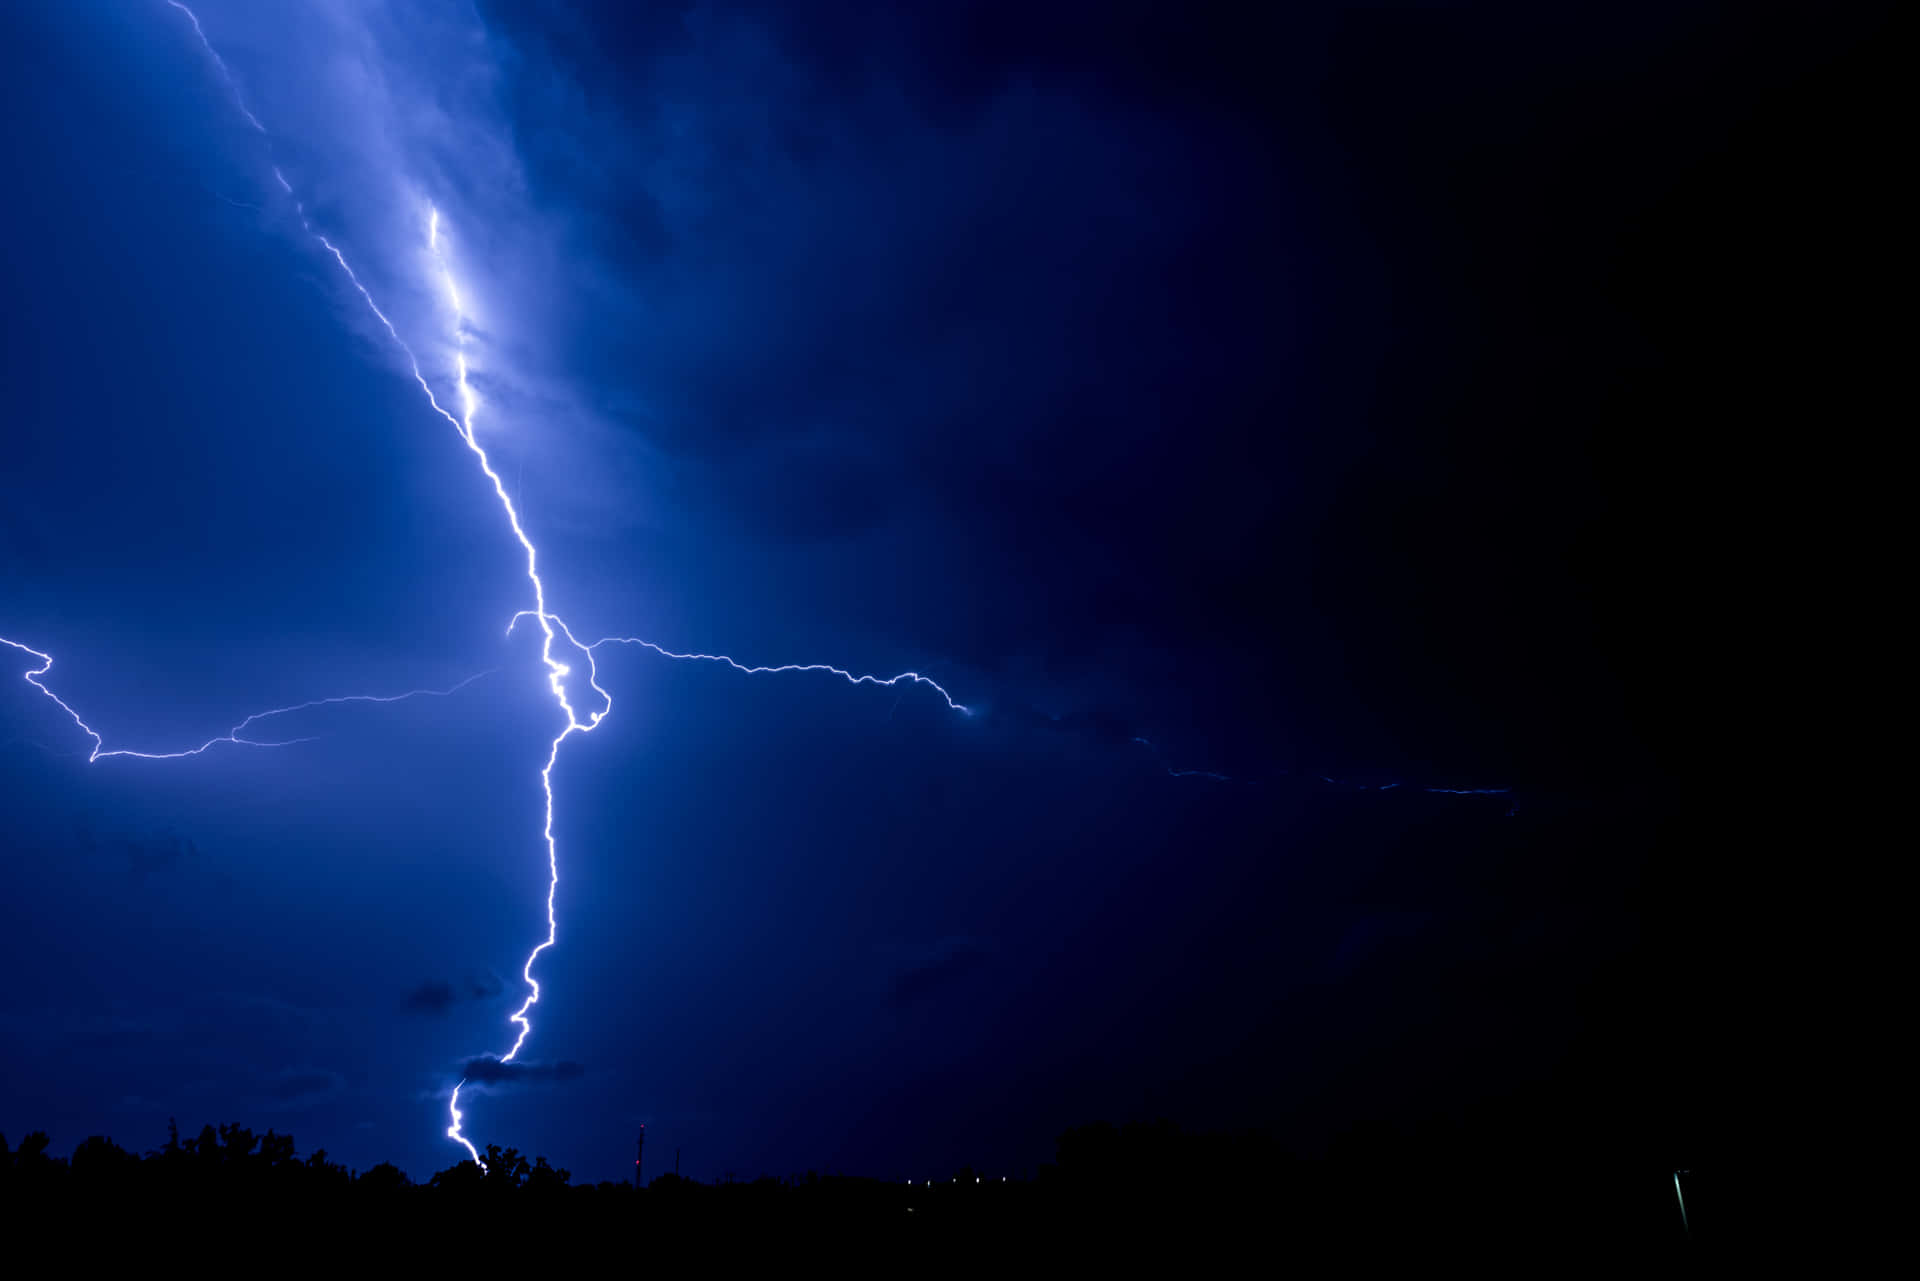 Download Blue Lightning Strikes Against a Pitch-Black Sky | Wallpapers.com